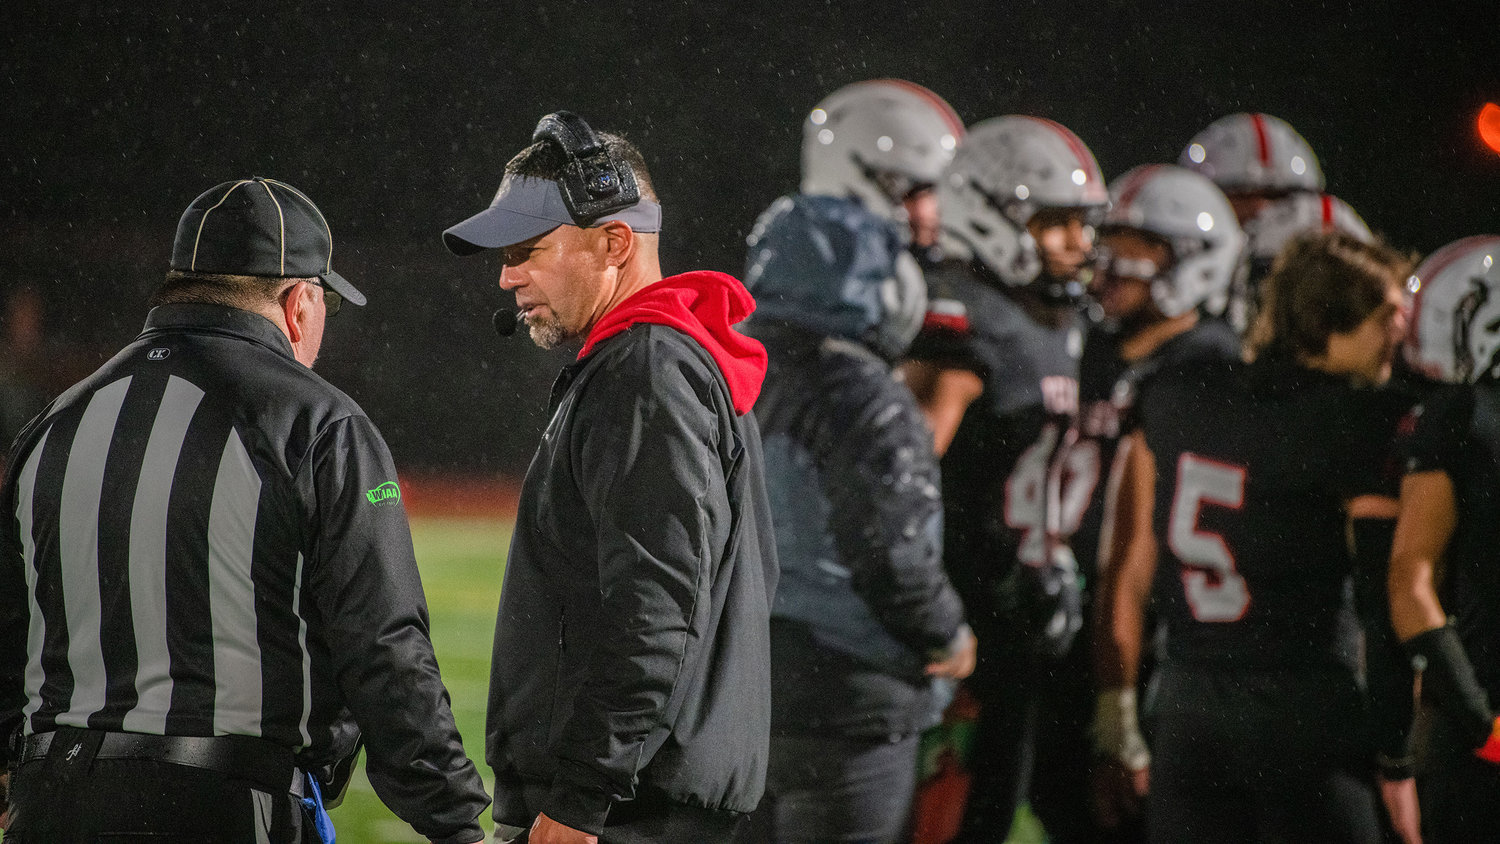 Yelm Head Coach Jason Ronquillo talks to a referee after a play during the Friday night game against Bishop Blanchet.